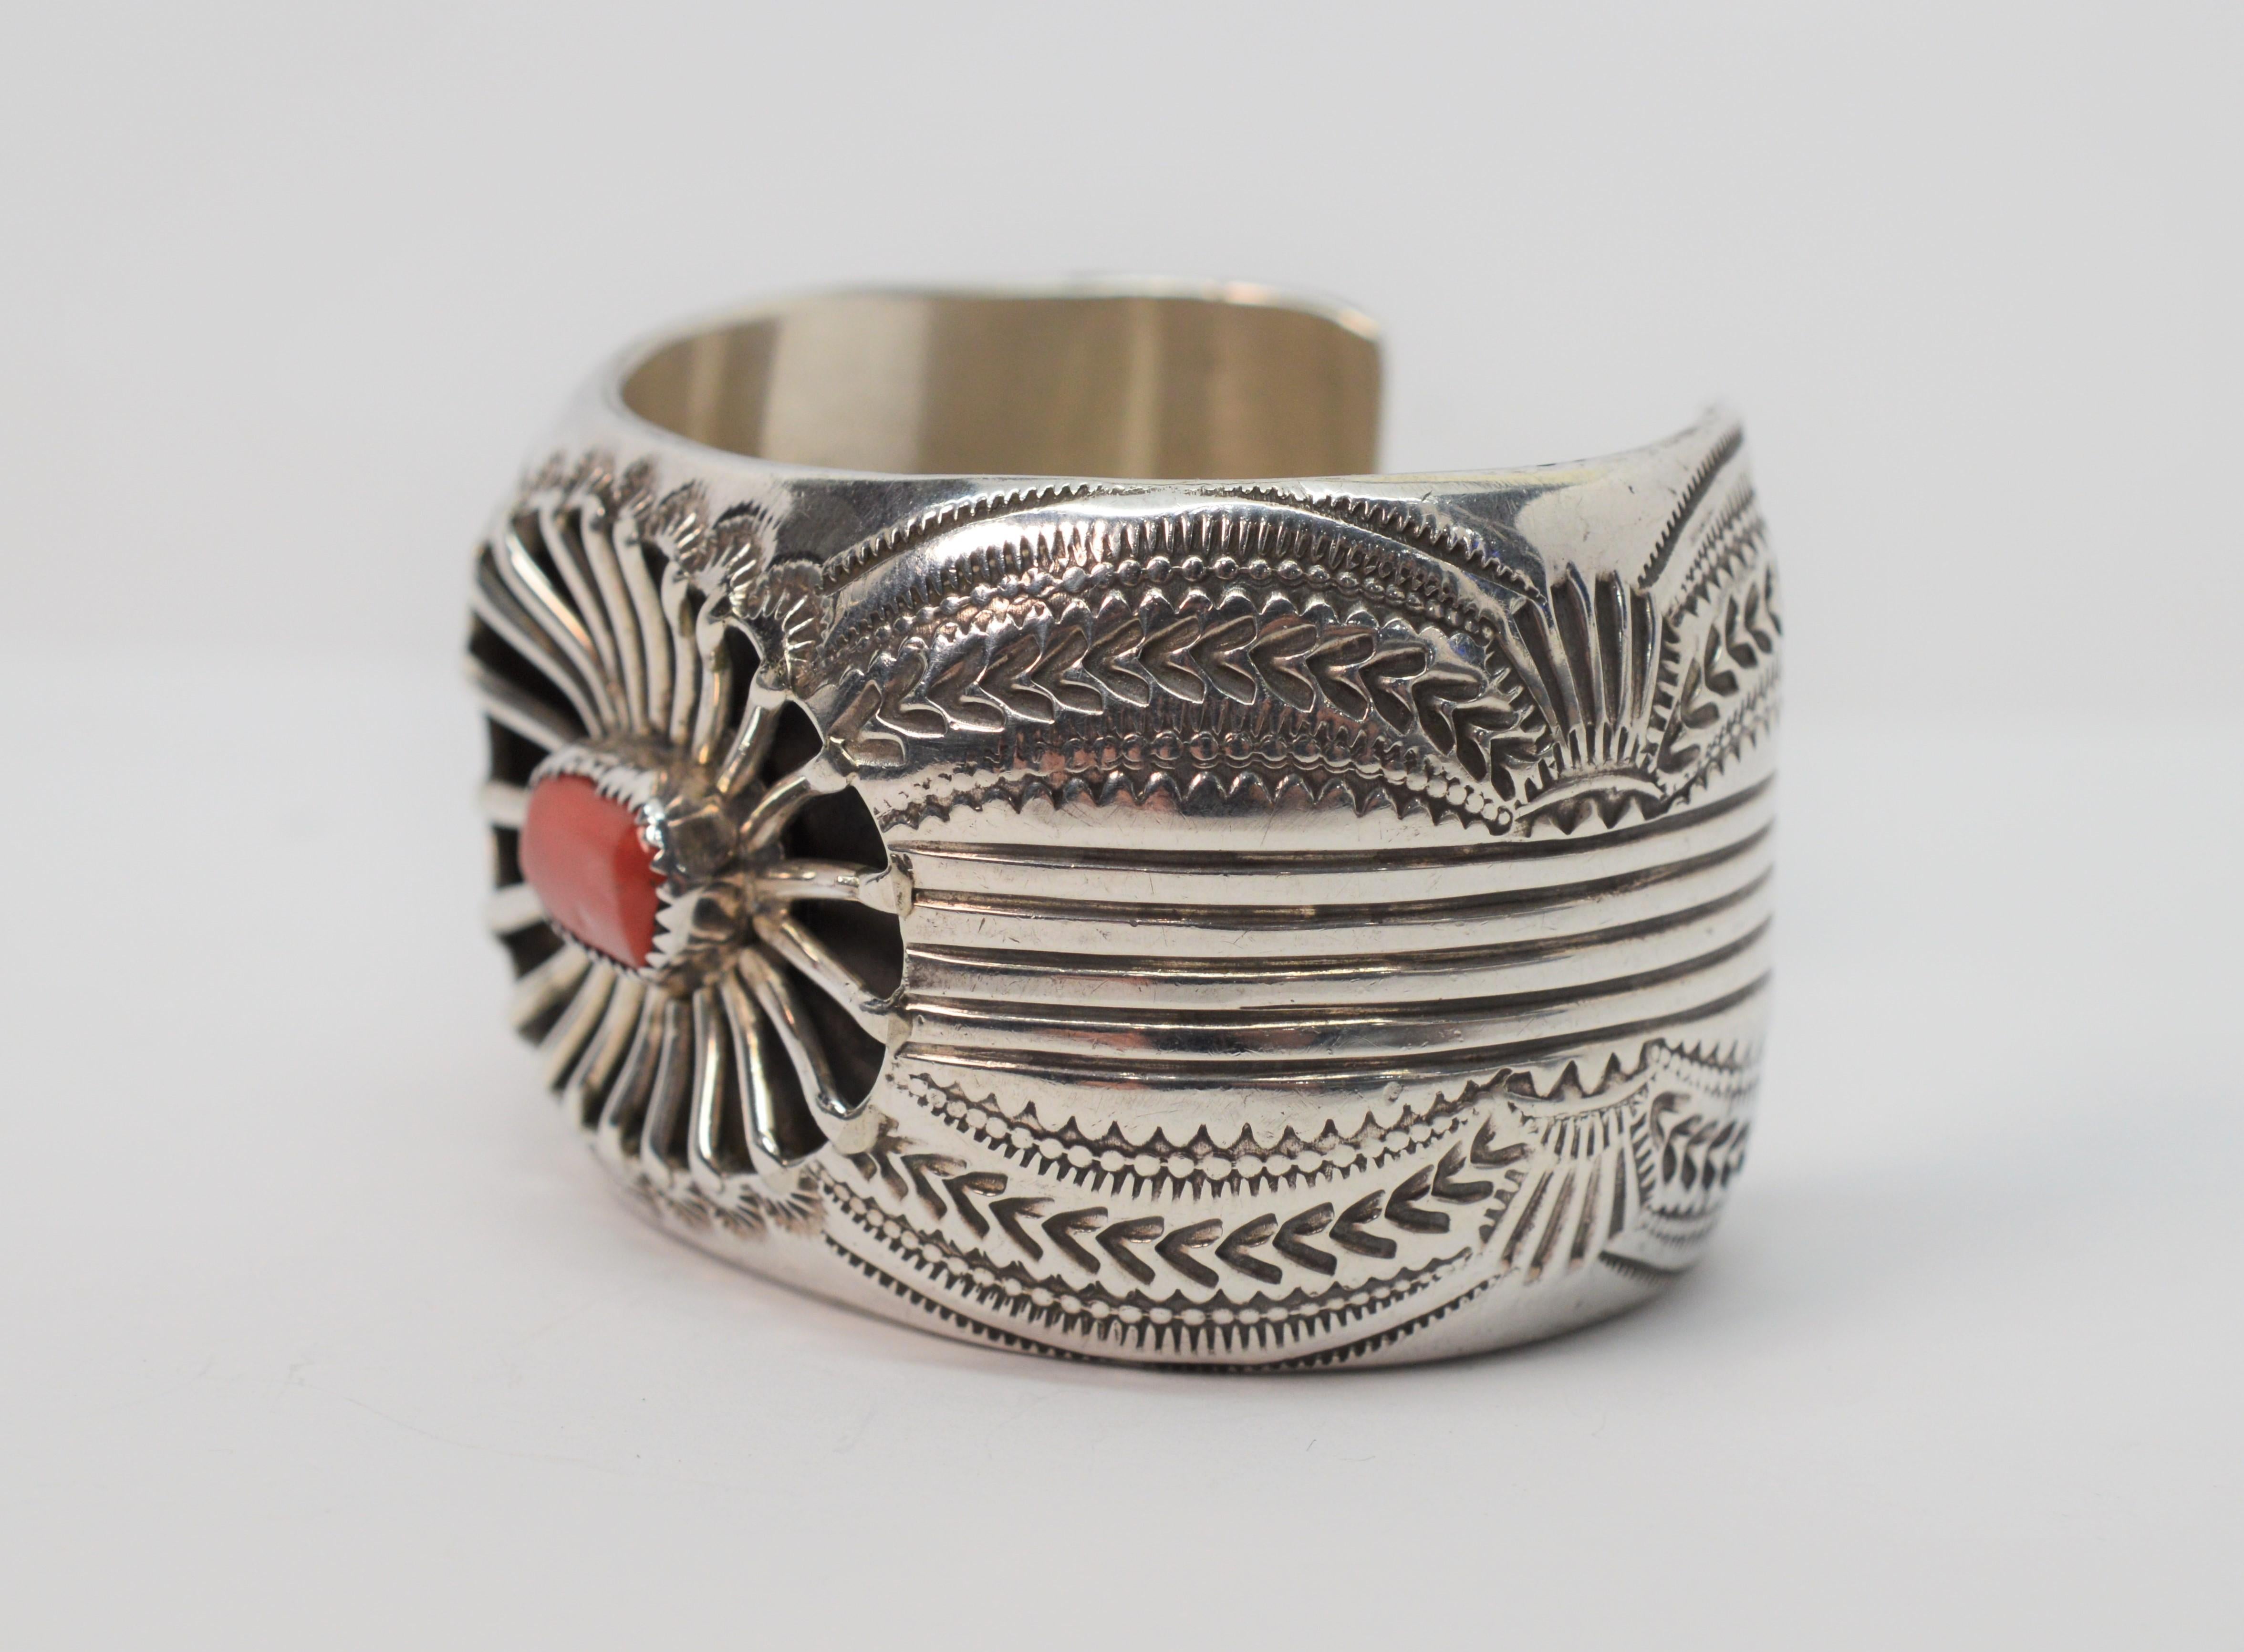 Finely crafted, this Native American style cuff bracelet is by well known Navajo silversmith Wilbert Benally. This substantial and exquisitely detailed cuff bracelet, approximately 1-1/2 inches wide, is hand engraved with a tribal patterned design